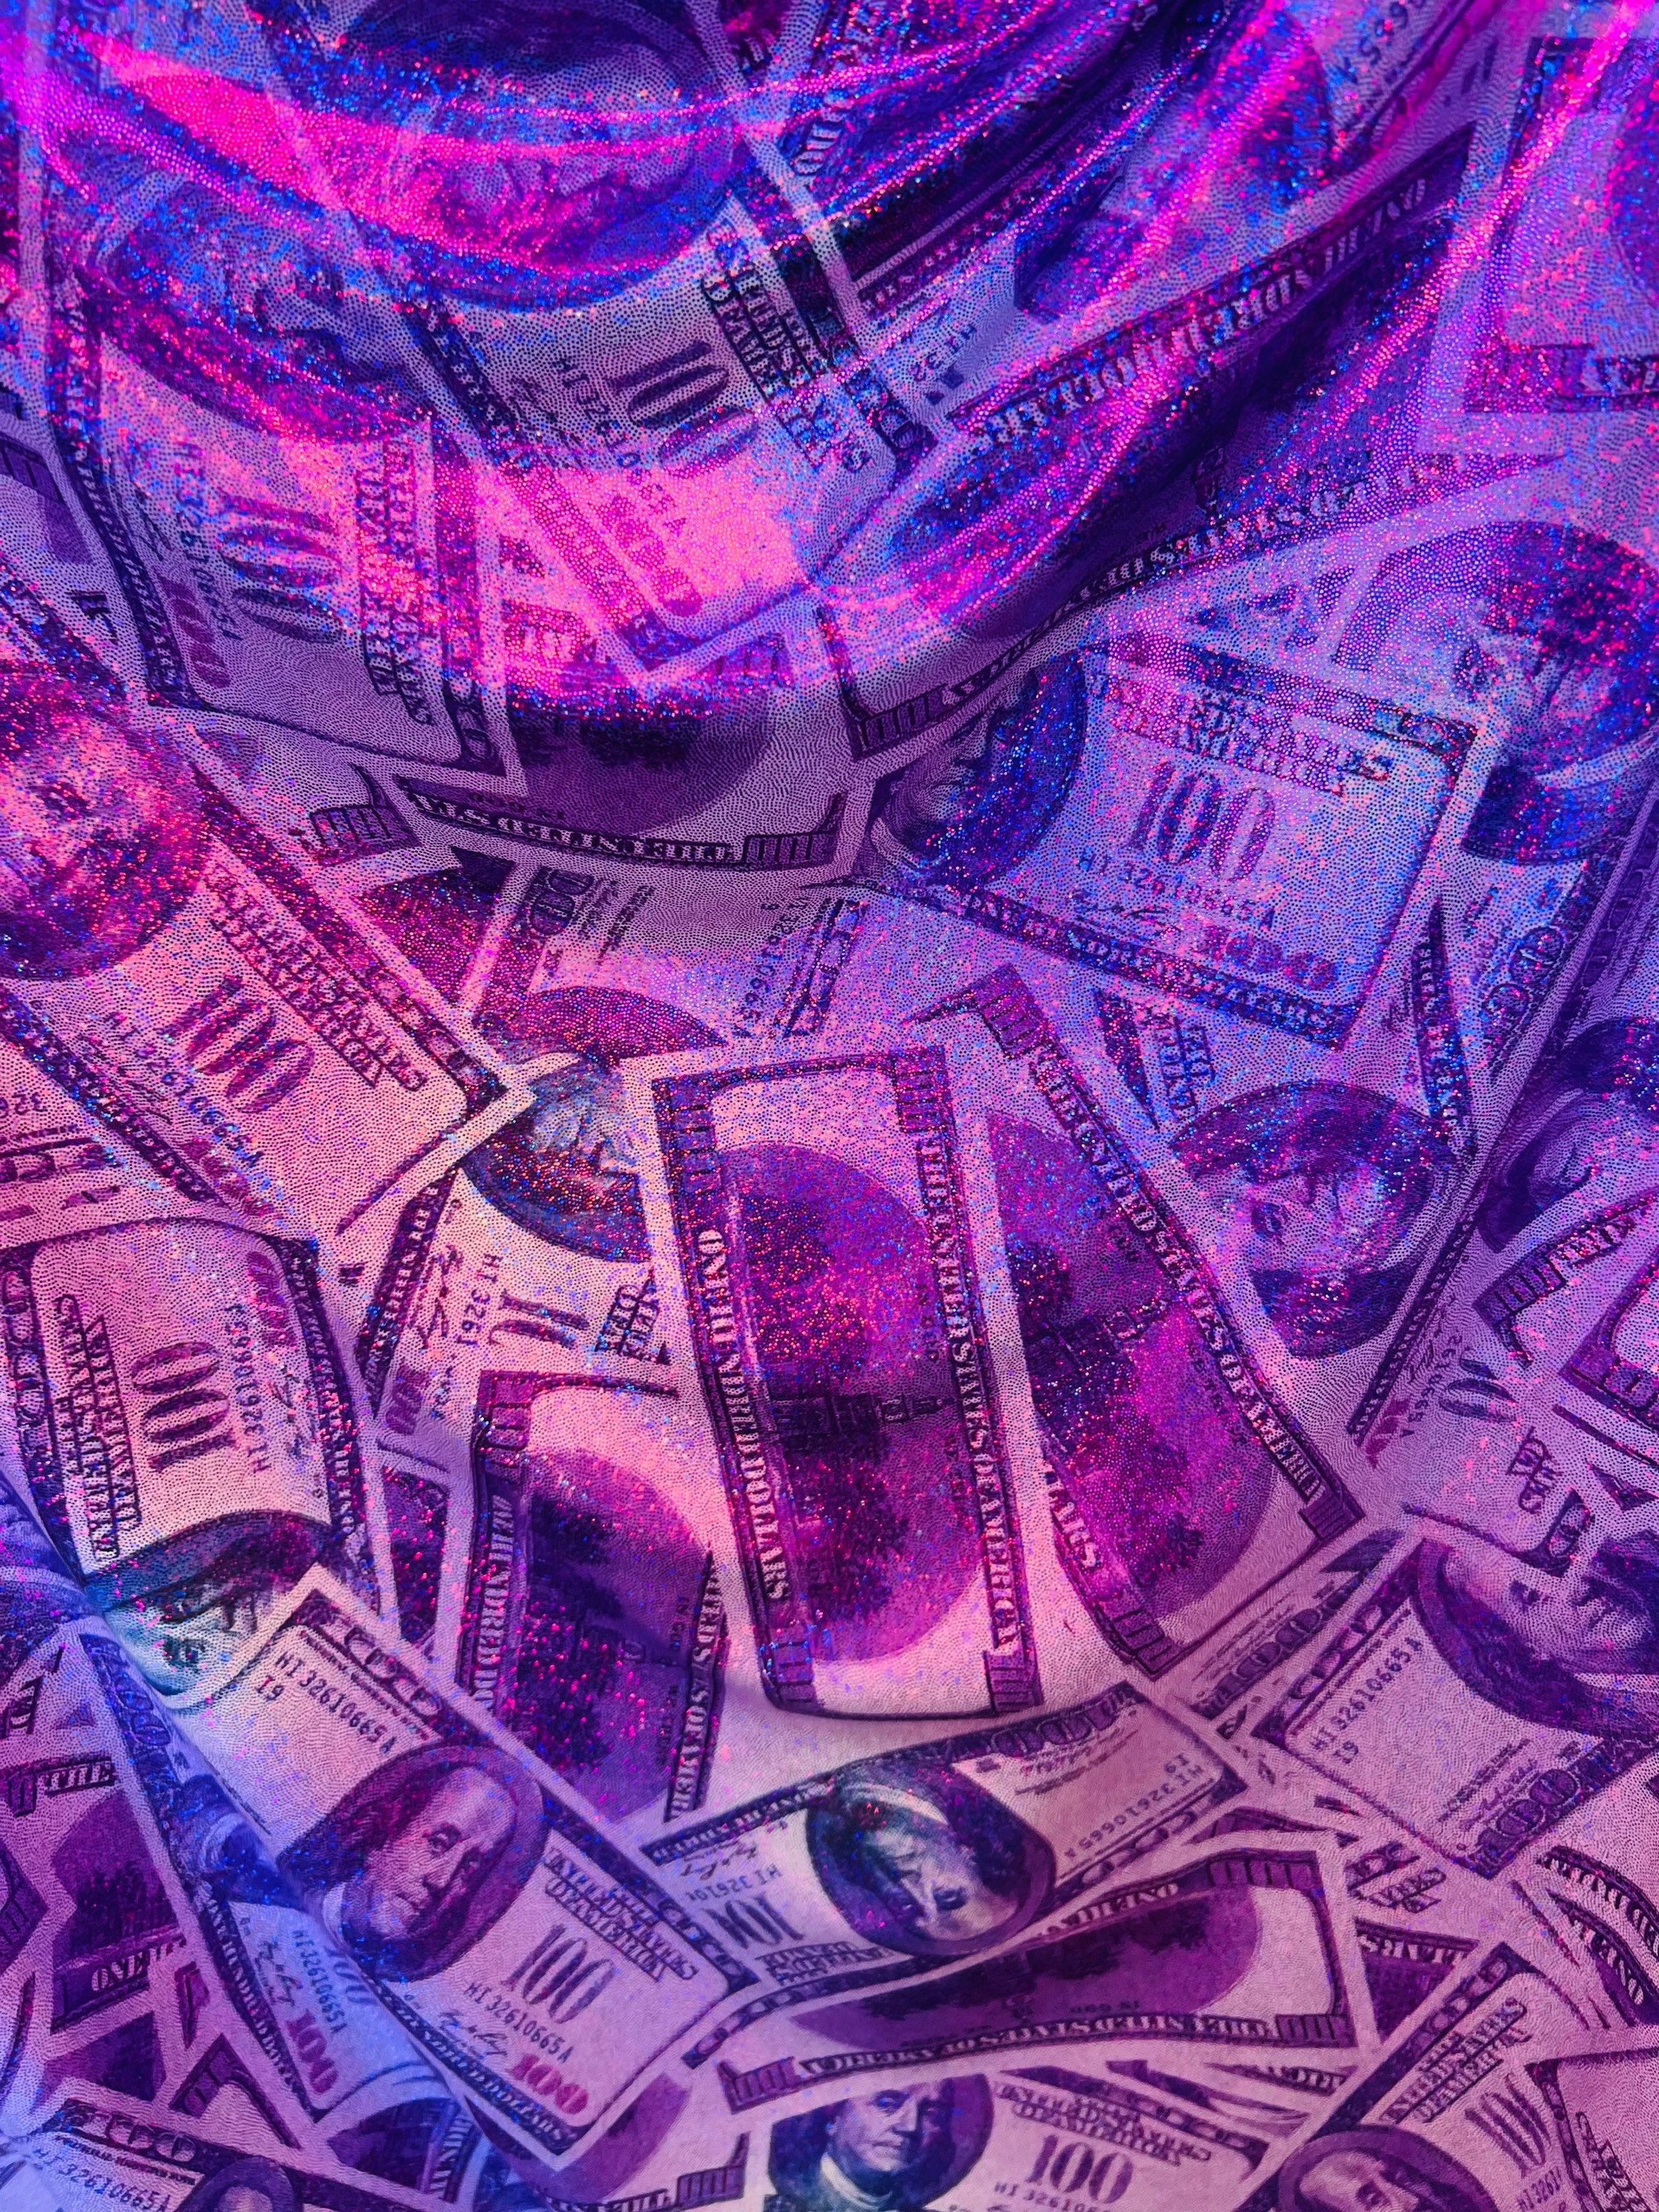 A photo of a pile of money with a pink and blue hue. - Money